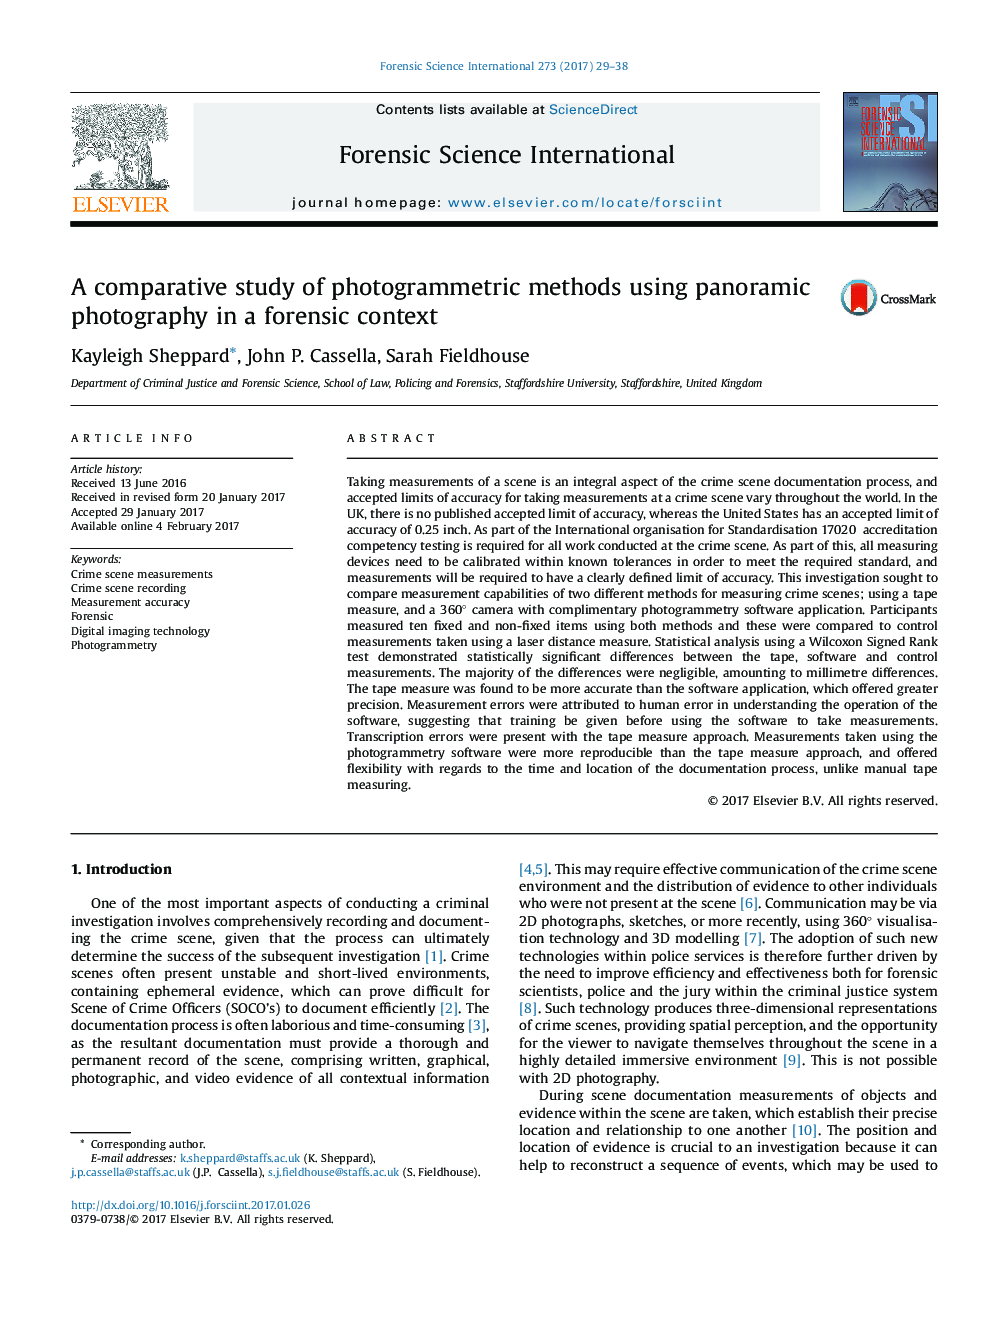 A comparative study of photogrammetric methods using panoramic photography in a forensic context